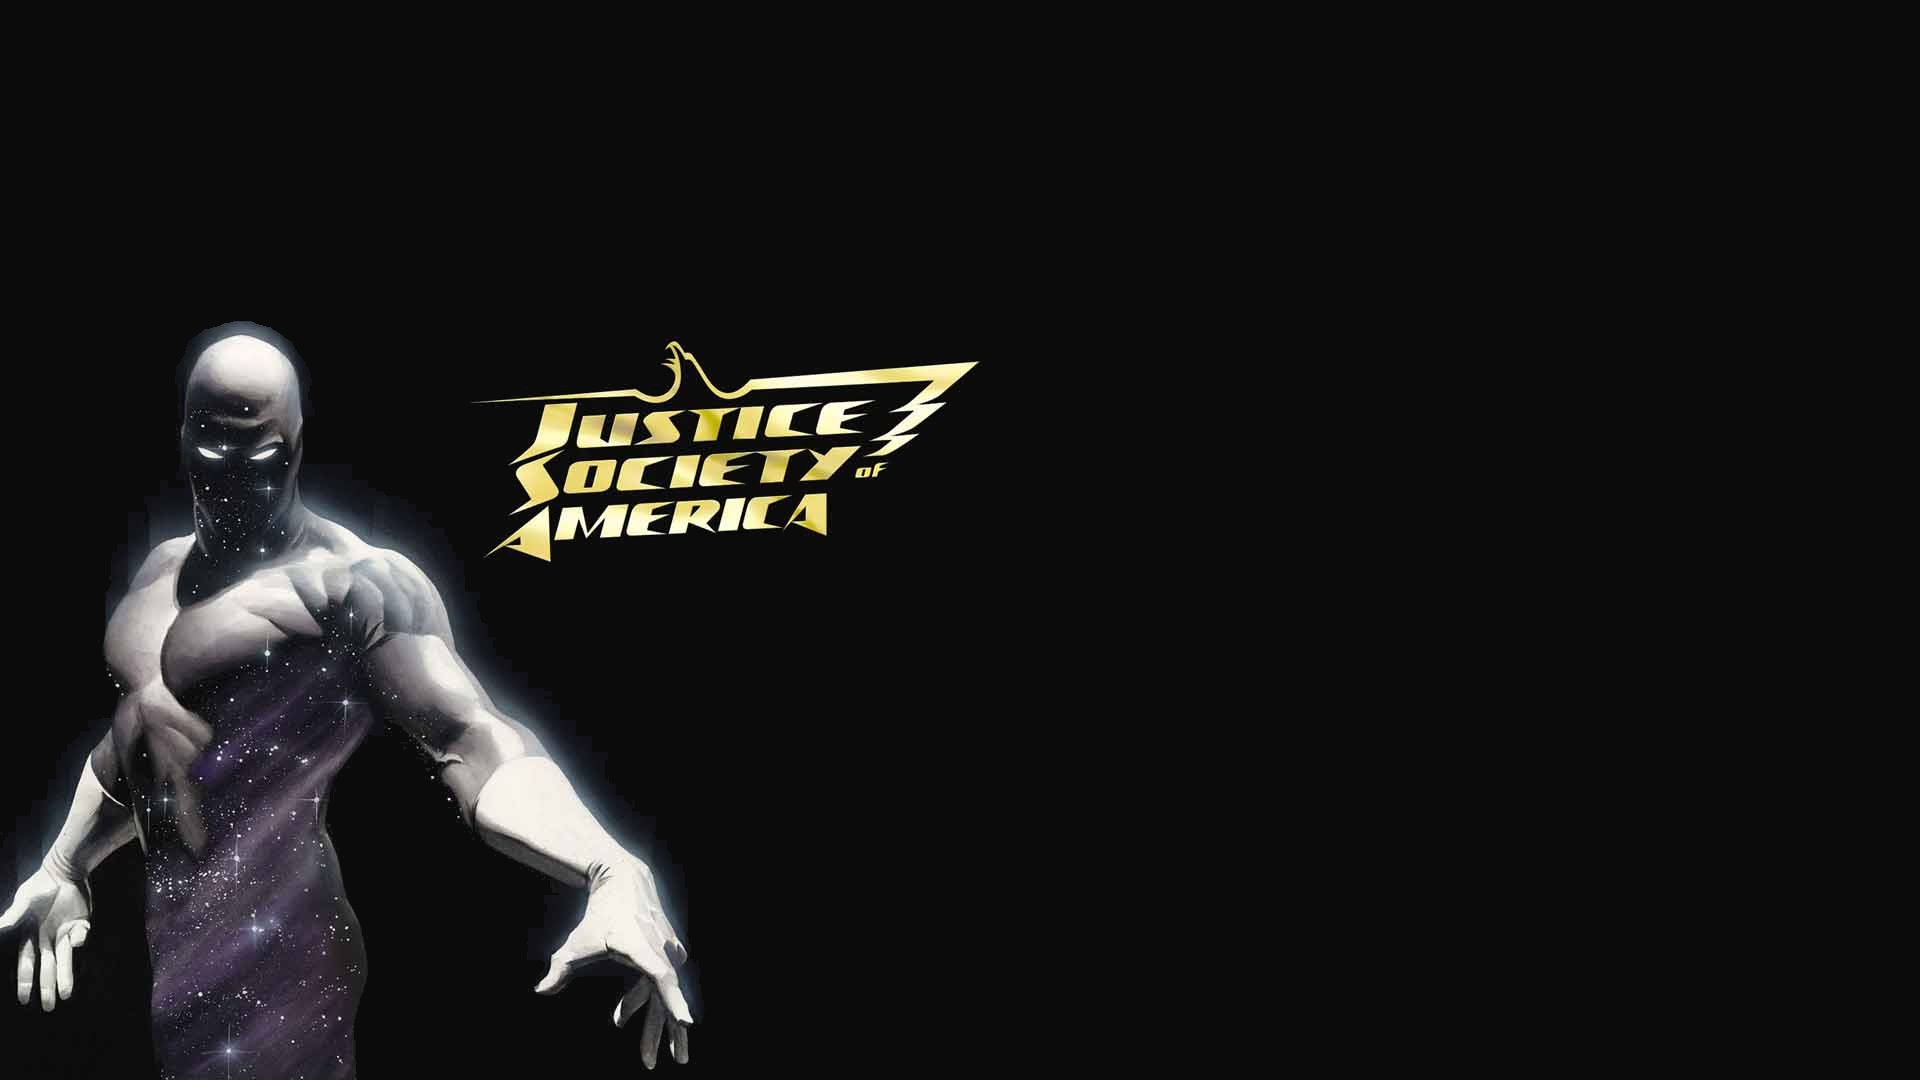 Comics Justice Society of America HD Wallpaper | Background Image